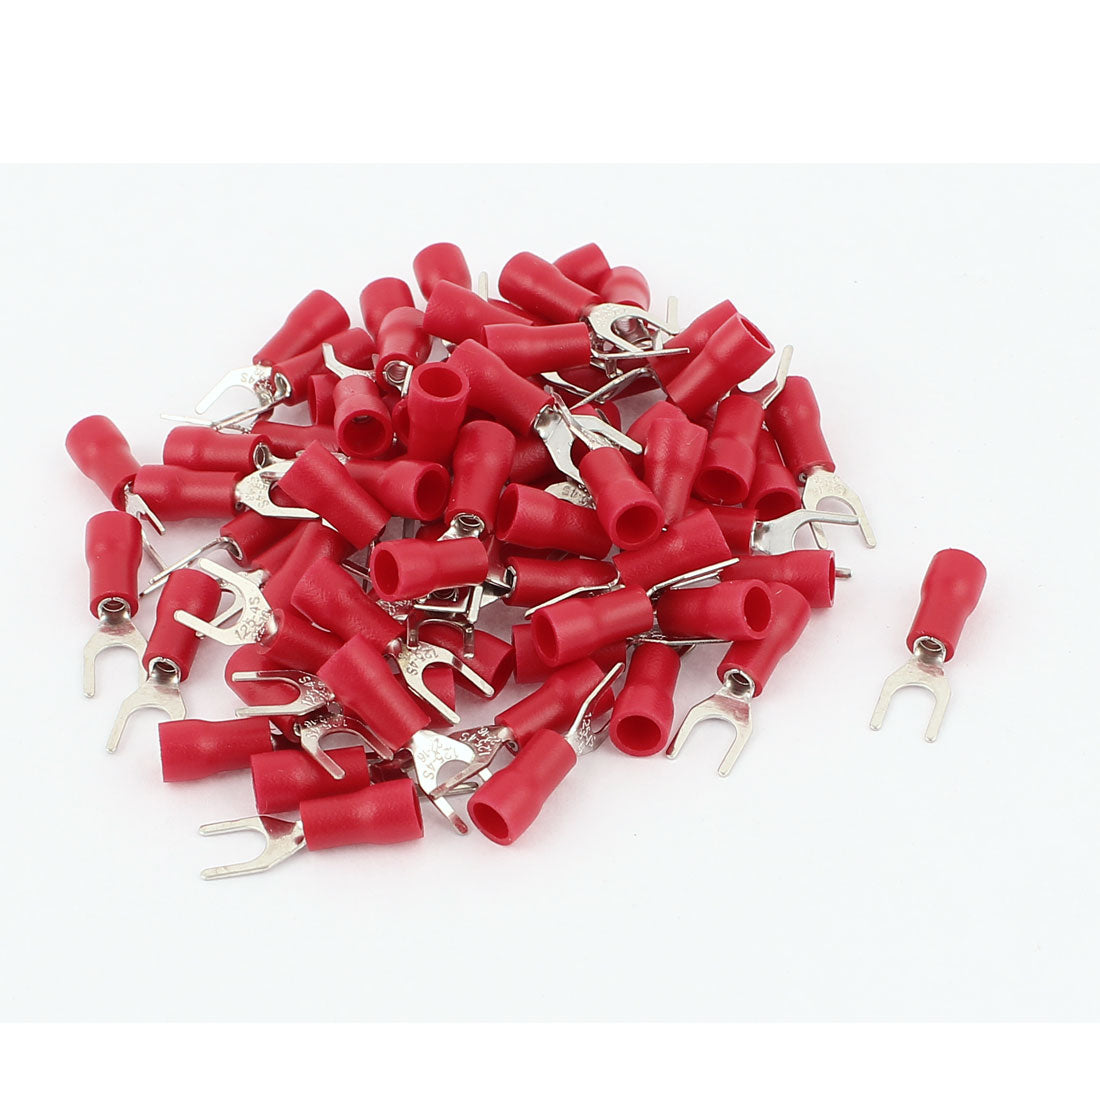 uxcell Uxcell 74pcs SVS1.25-4 Fork Spade Insulated Wiring Terminal Connector Red for AWG 22-16